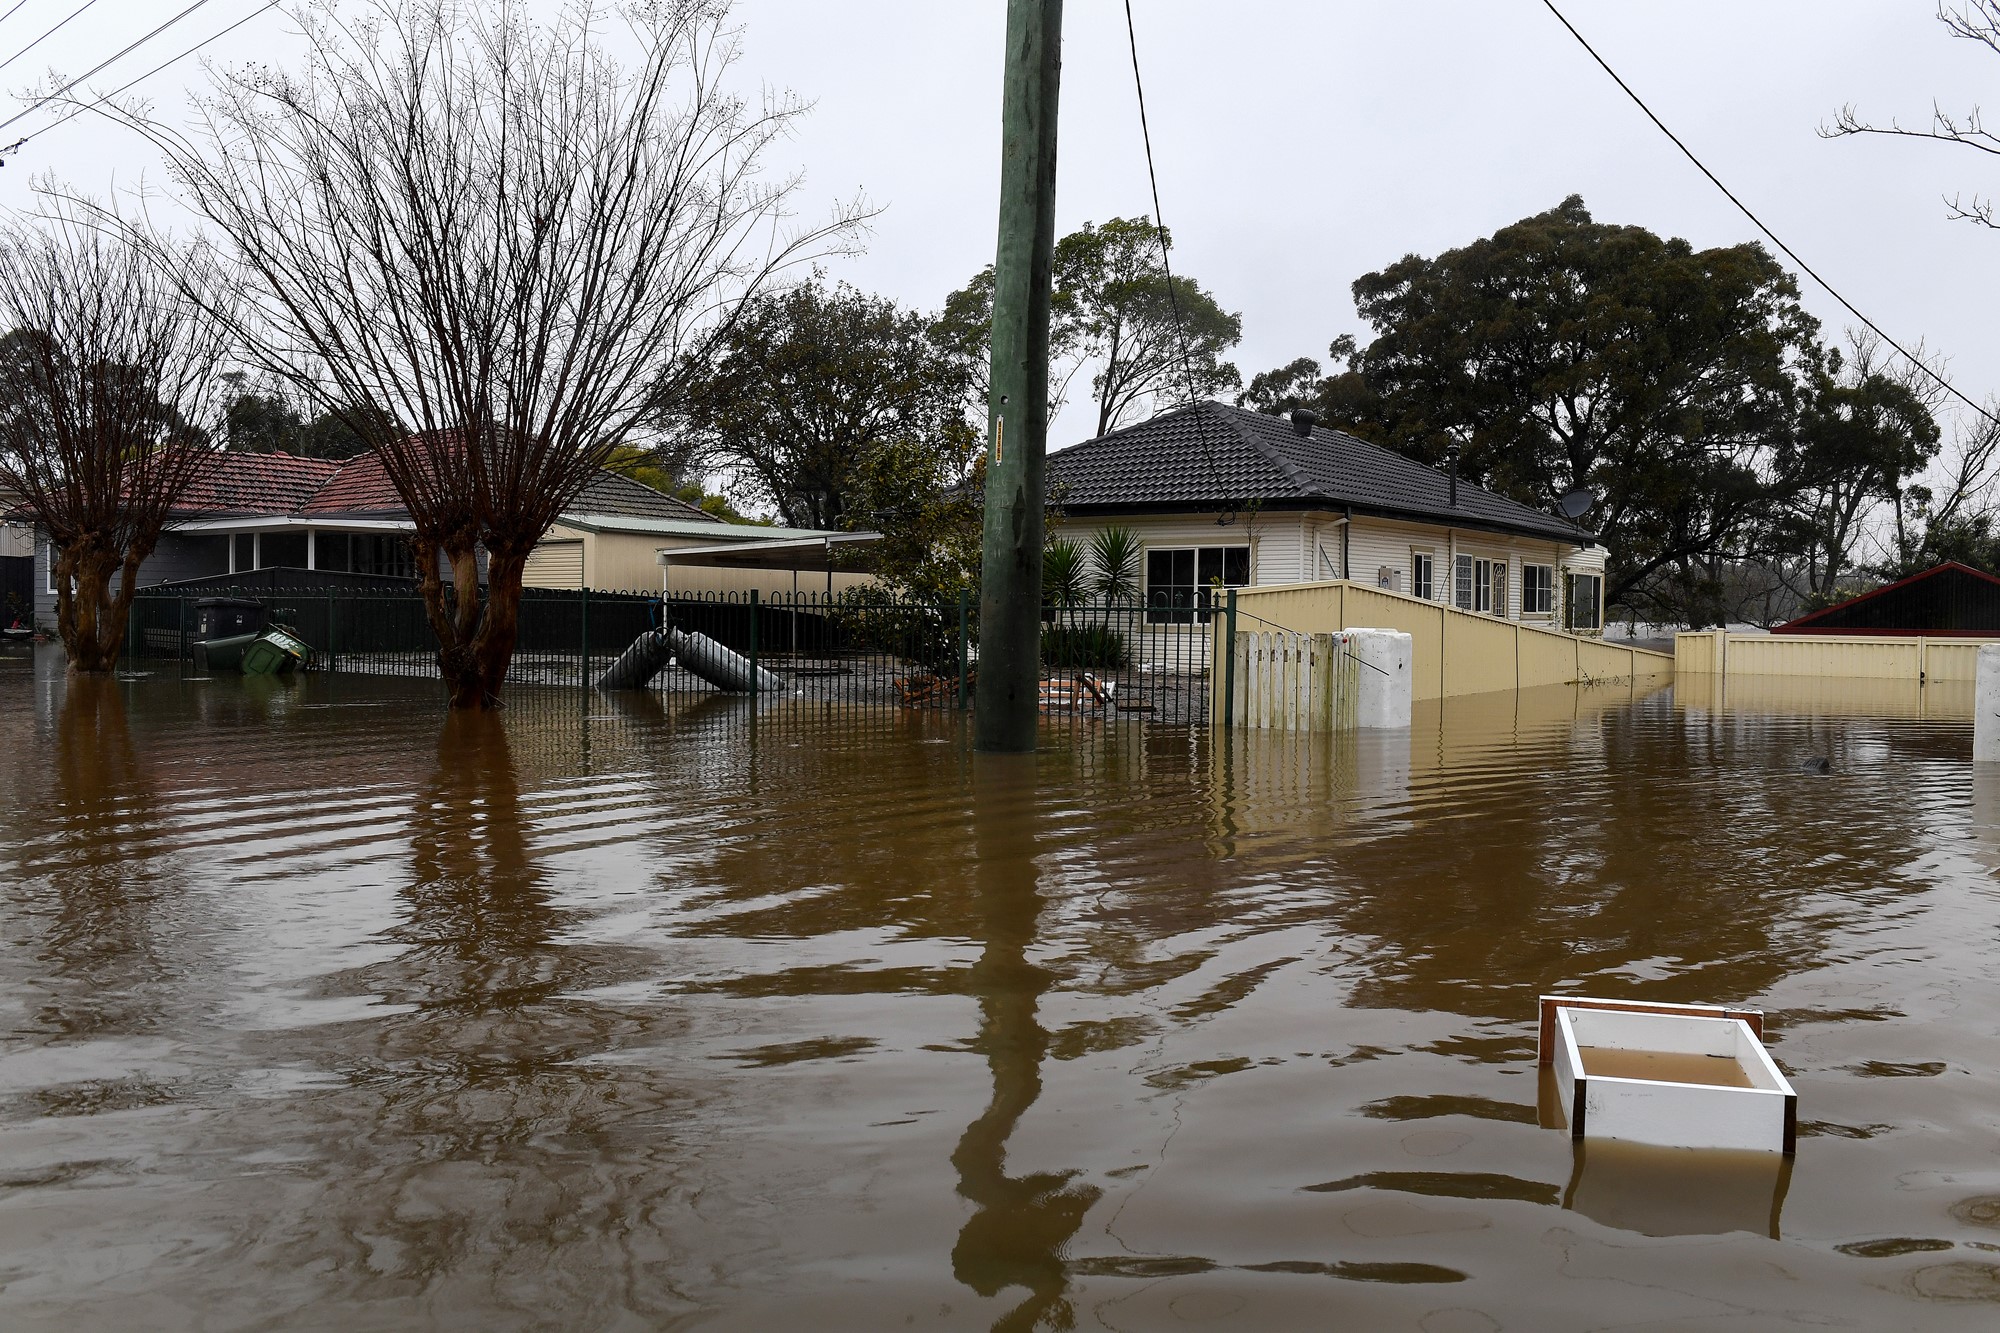 A box floats down a flooded street as homes are seen in the background.